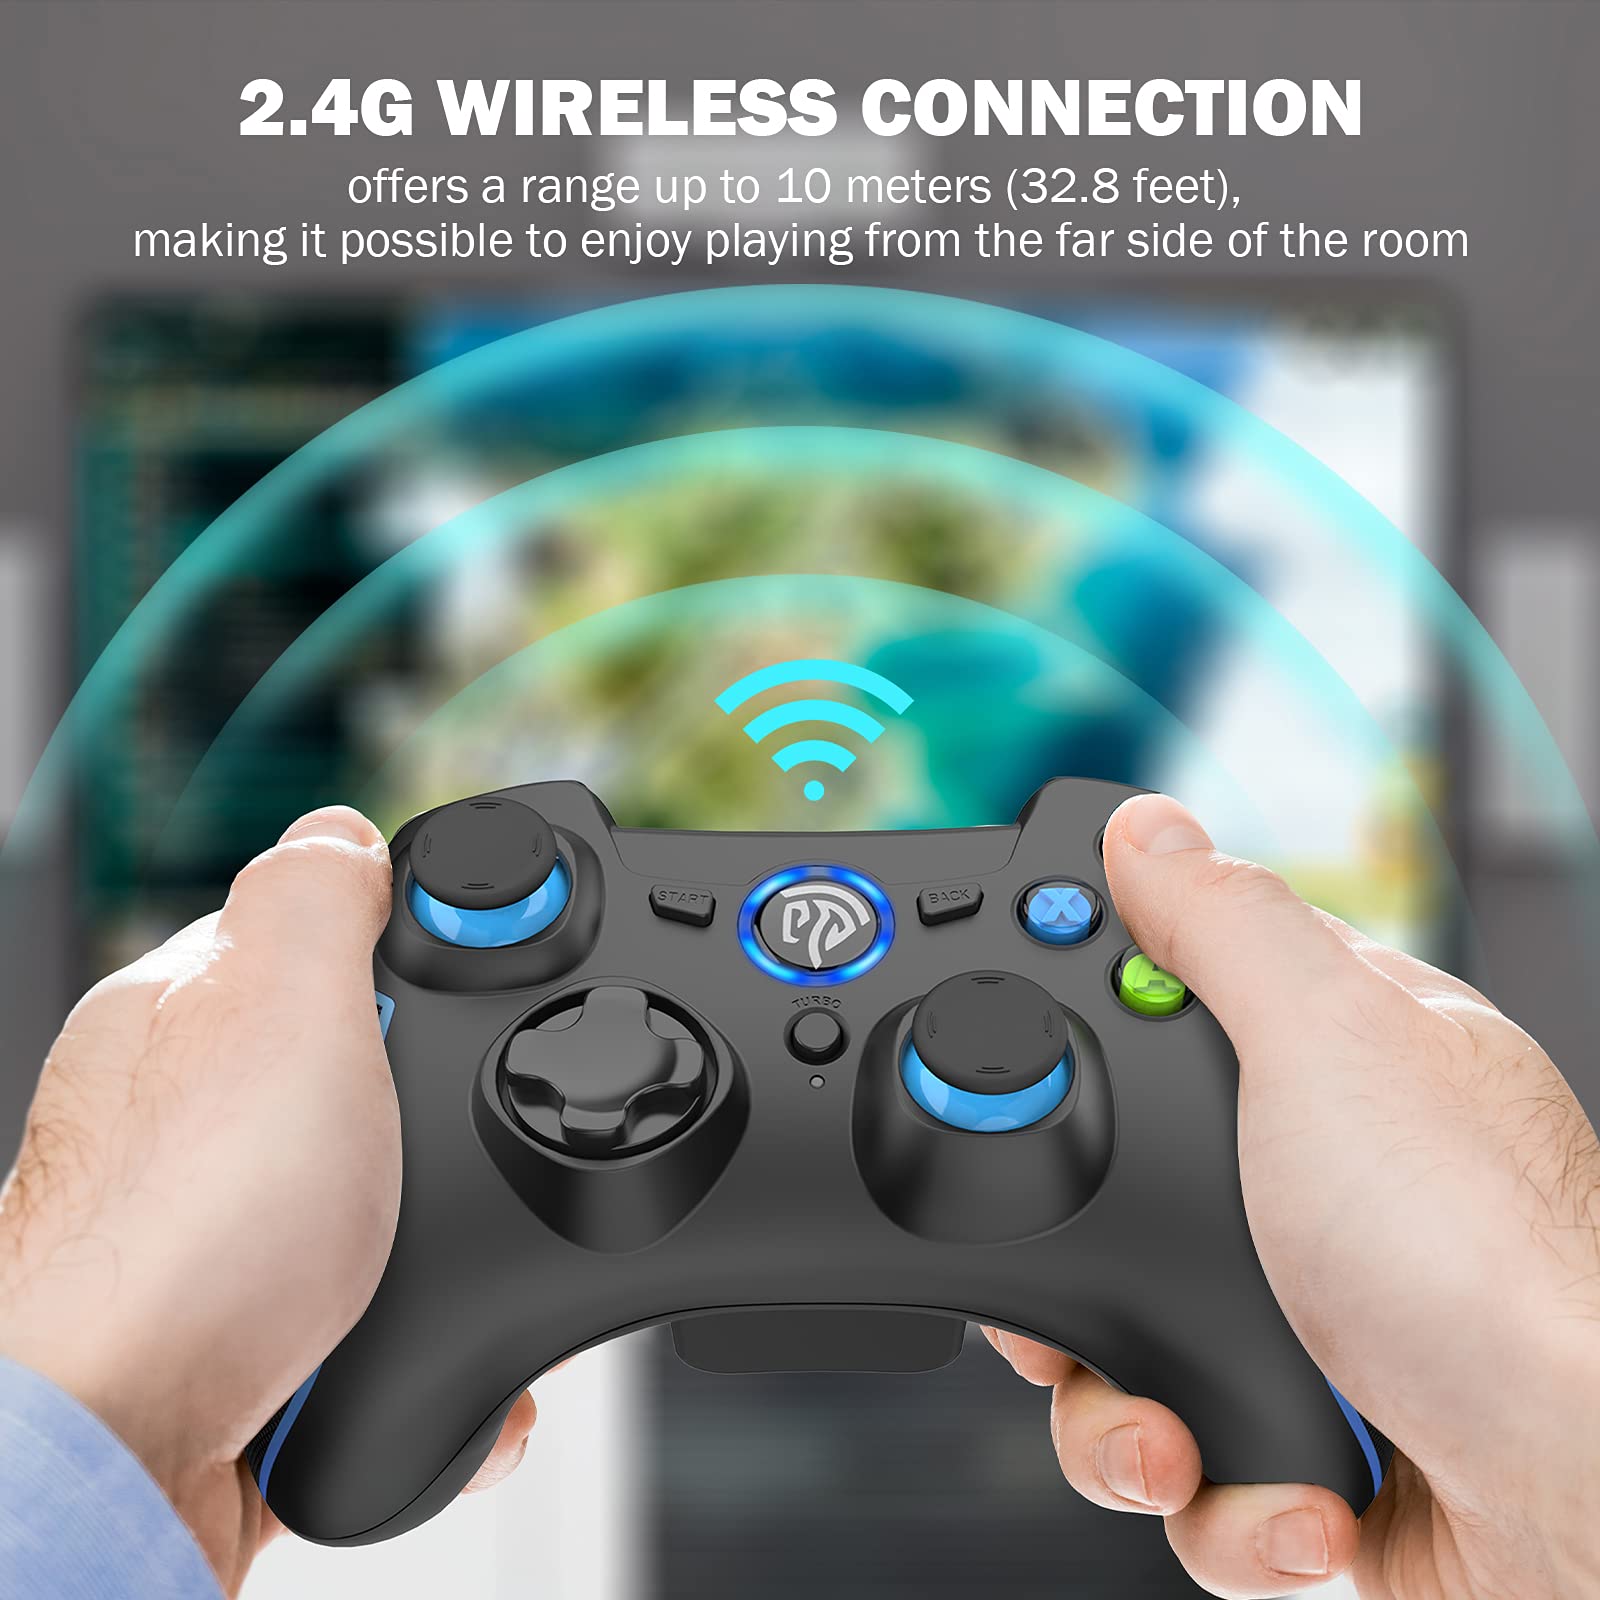 EasySMX 2.4G Wireless Controller for PS3, PC Gamepads with Vibration Fire Button Range up to 10m Support PC (Windows XP/7/8/8.1/10), Steam, PS3, Android, Vista, TV Box Portable Gaming Joystick Handle